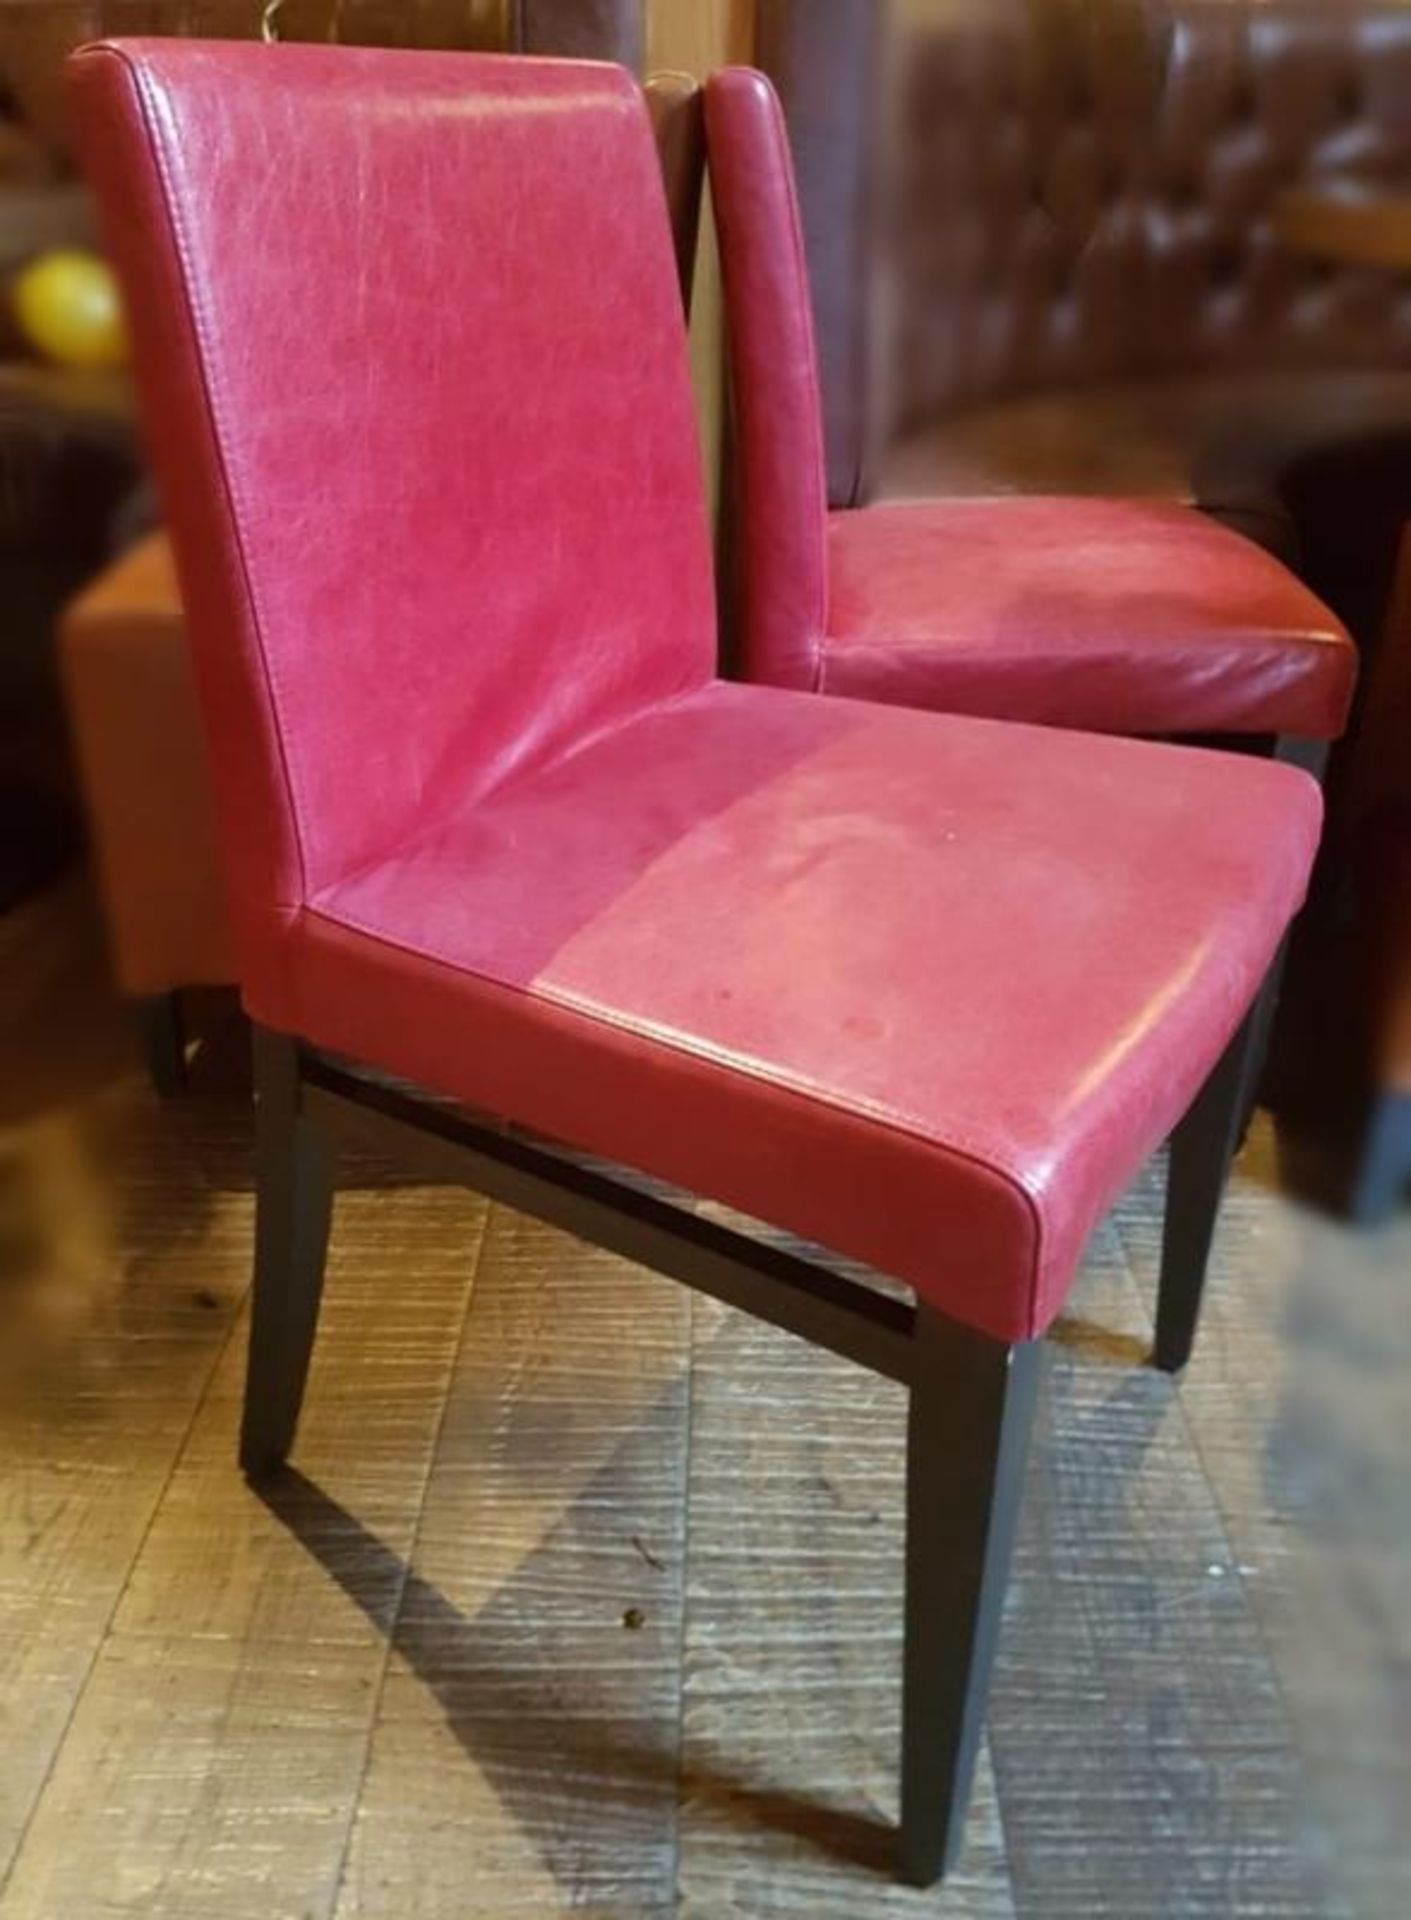 4 x Hard-wearing Red Leather Upholstered Commercial Dining Chairs - Recently Removed From A City Cen - Image 4 of 4